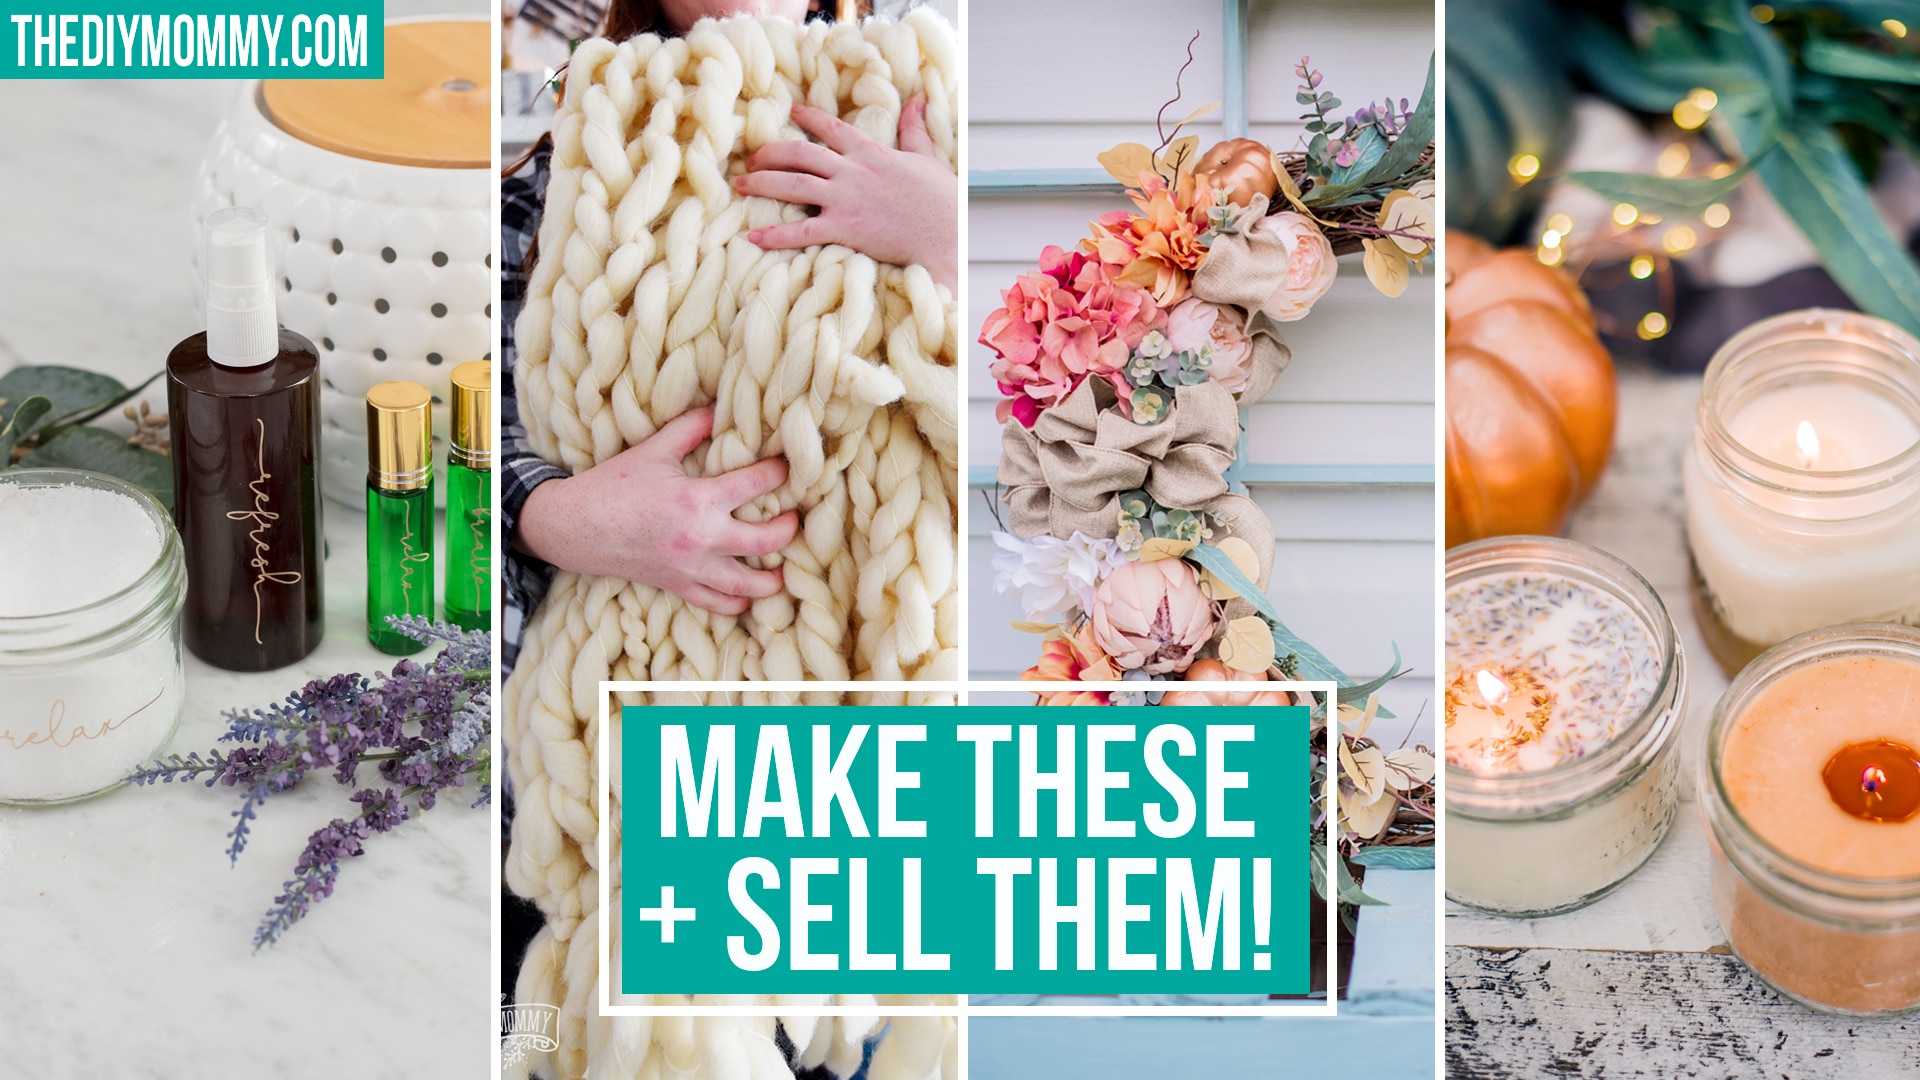 10 Crafts to Make & Sell